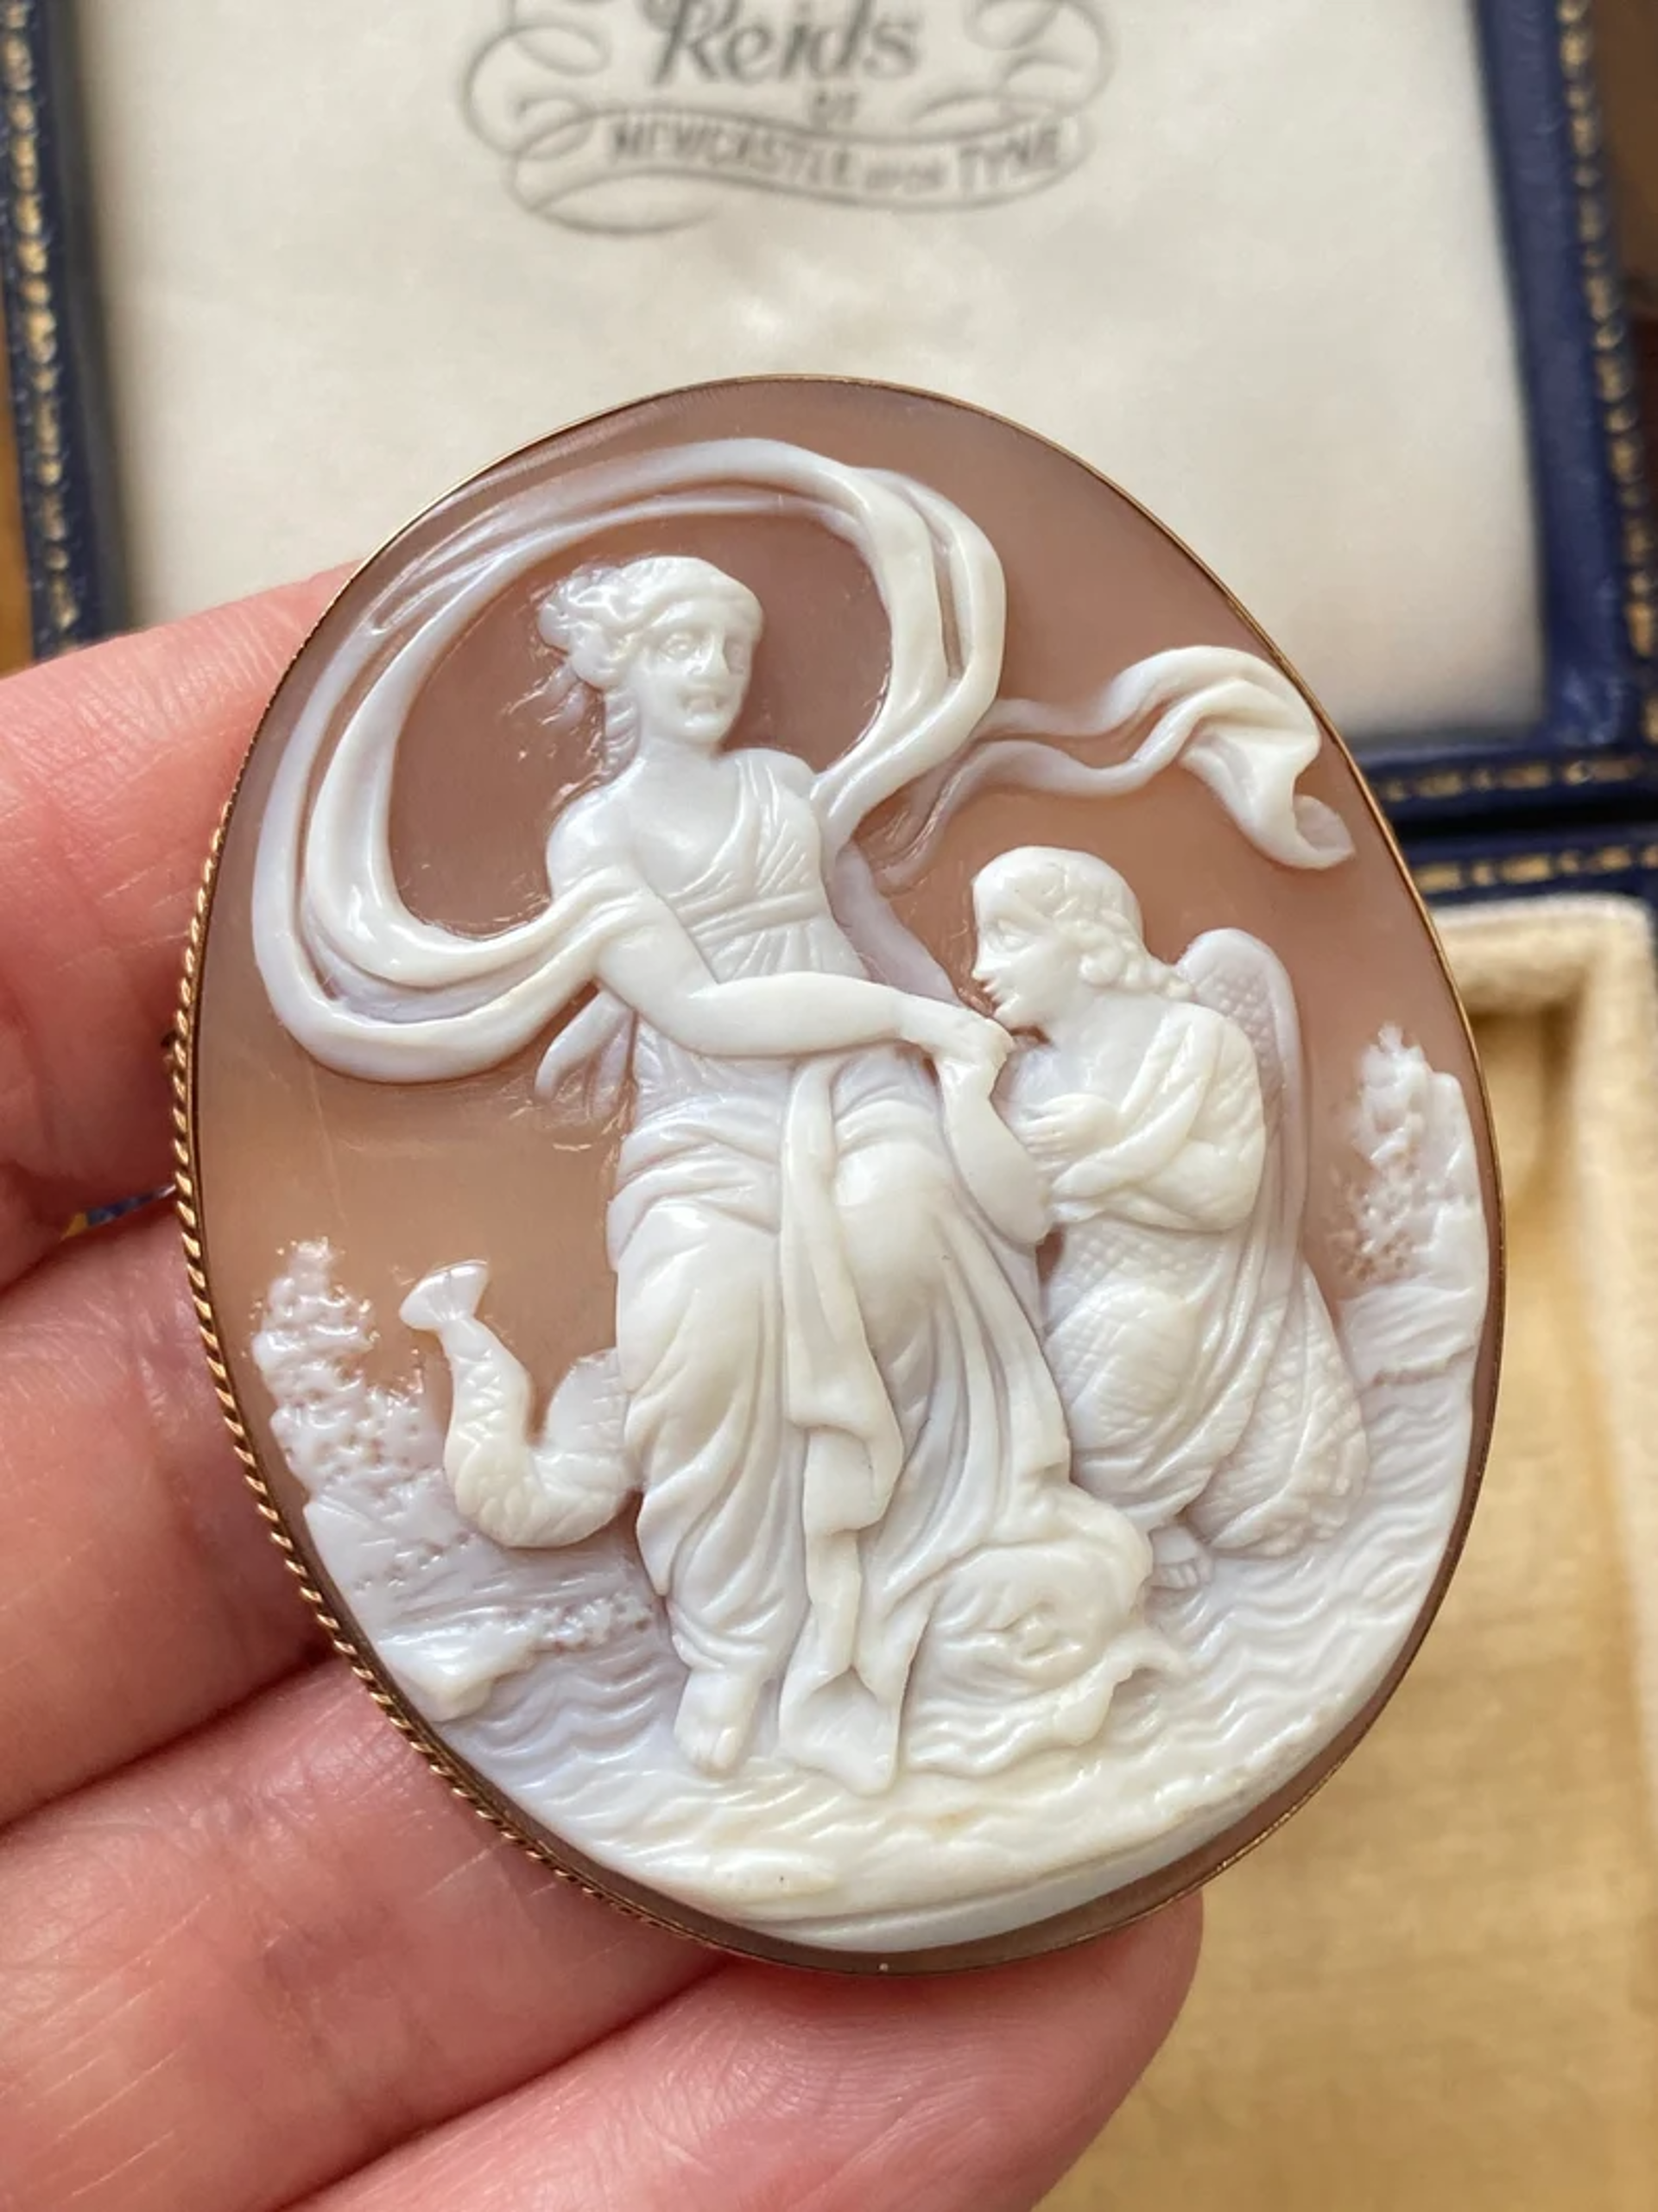 Gold carved Italian shell cameo, Venus & cupid brooch/pin by Cameo